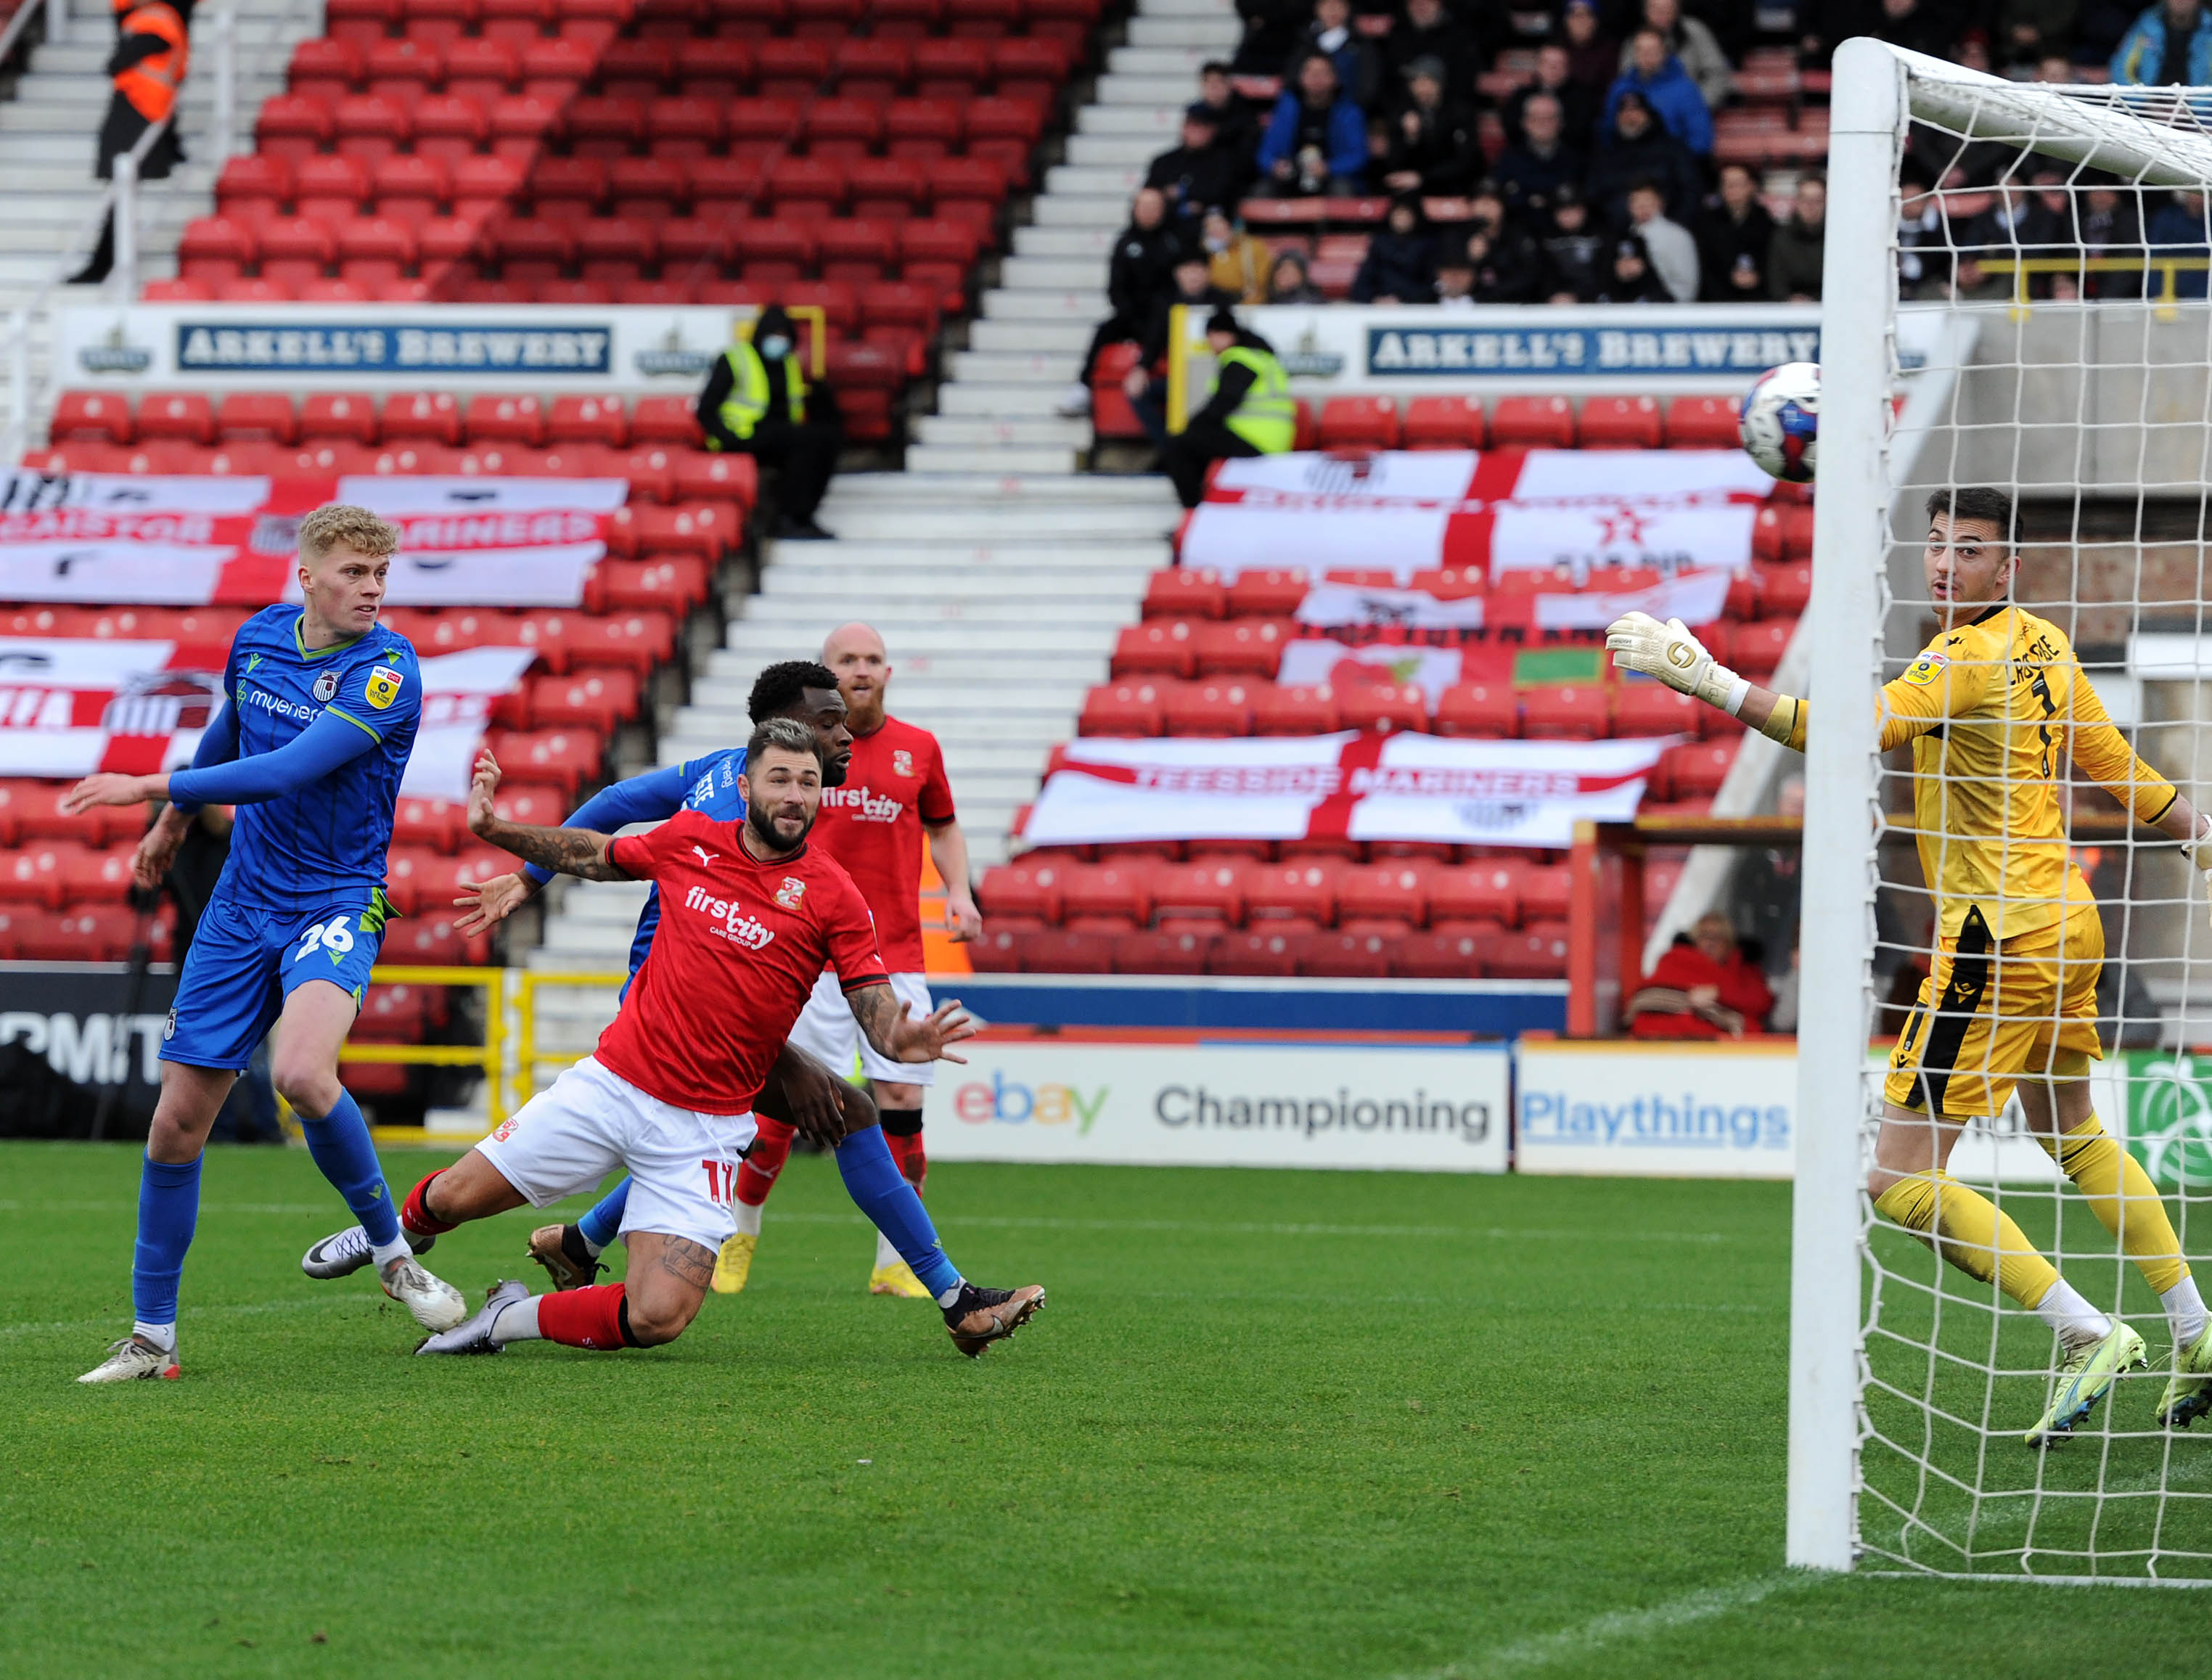 MATCH REPORT: Swindon (5) Grimsby Town (0)